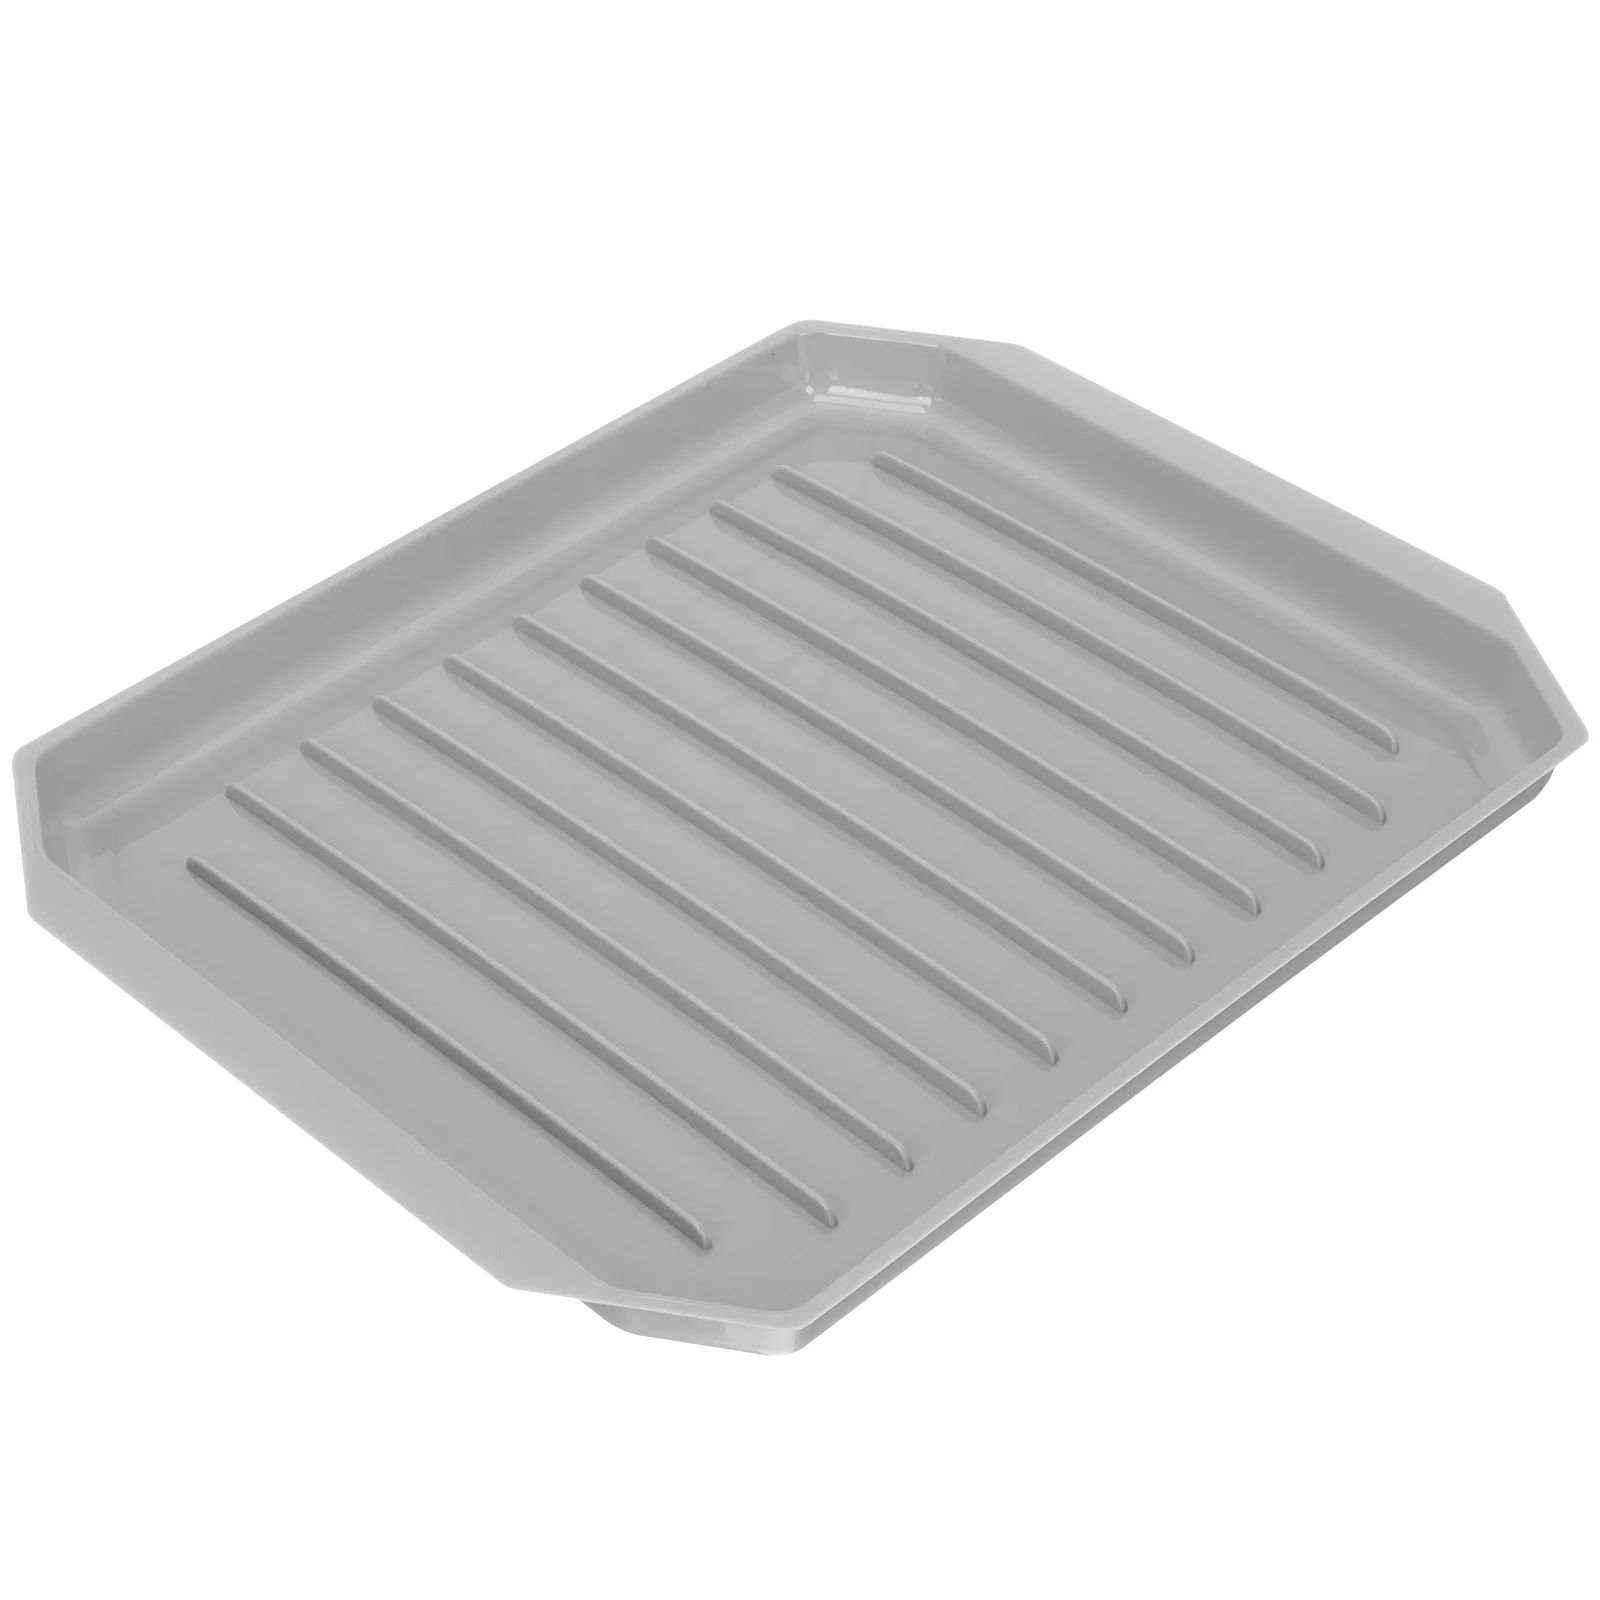 

Pan Microwave Bacon Oven Baking Meat Grill Tray Silicone Air Fryer Resting Toaster Pans Sheet Cooker Plates Cookers Trays